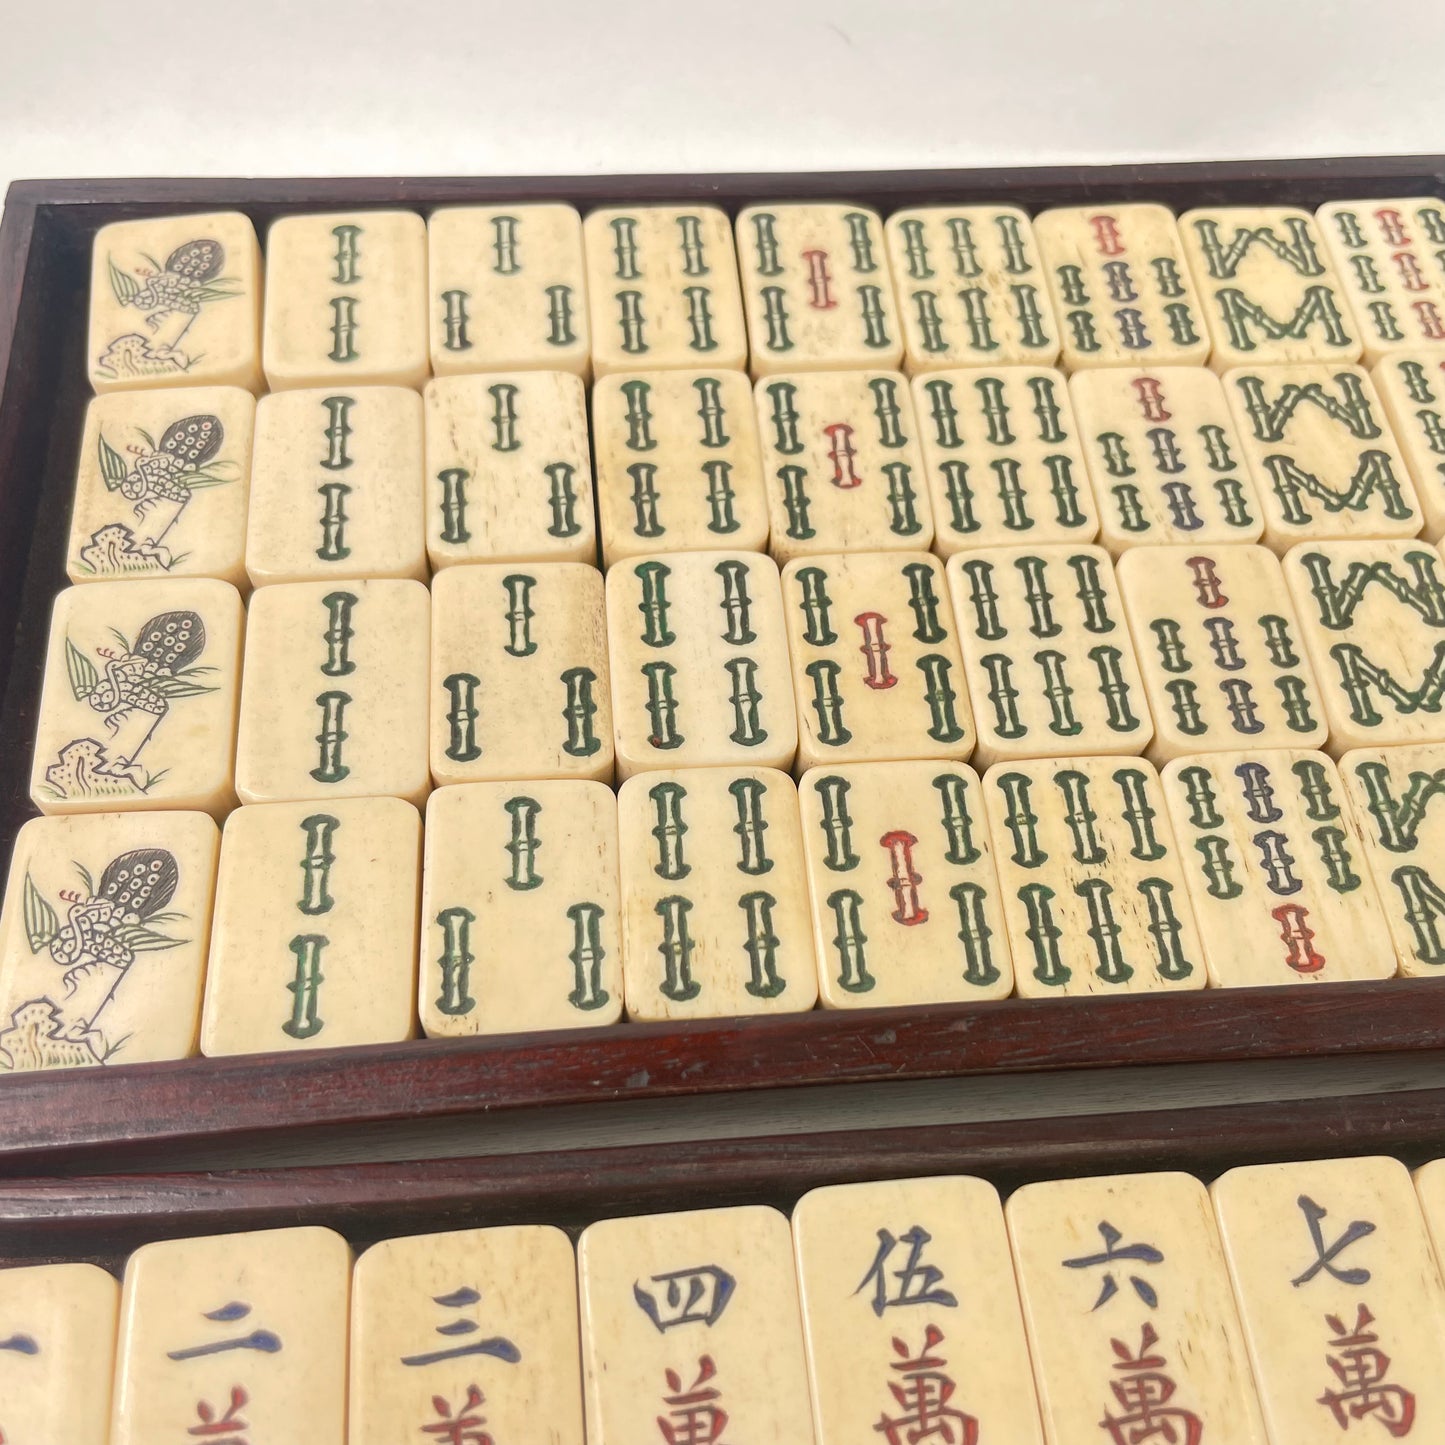 Antique Rare Complete c.1900 Chinese Mahjong Set (no English no Arabic Numerals) Small 3/4” x 1” Tiles Special Tiles are Flowers Box Includes Betting Sticks Dice w/ Box as well as Direction Disk